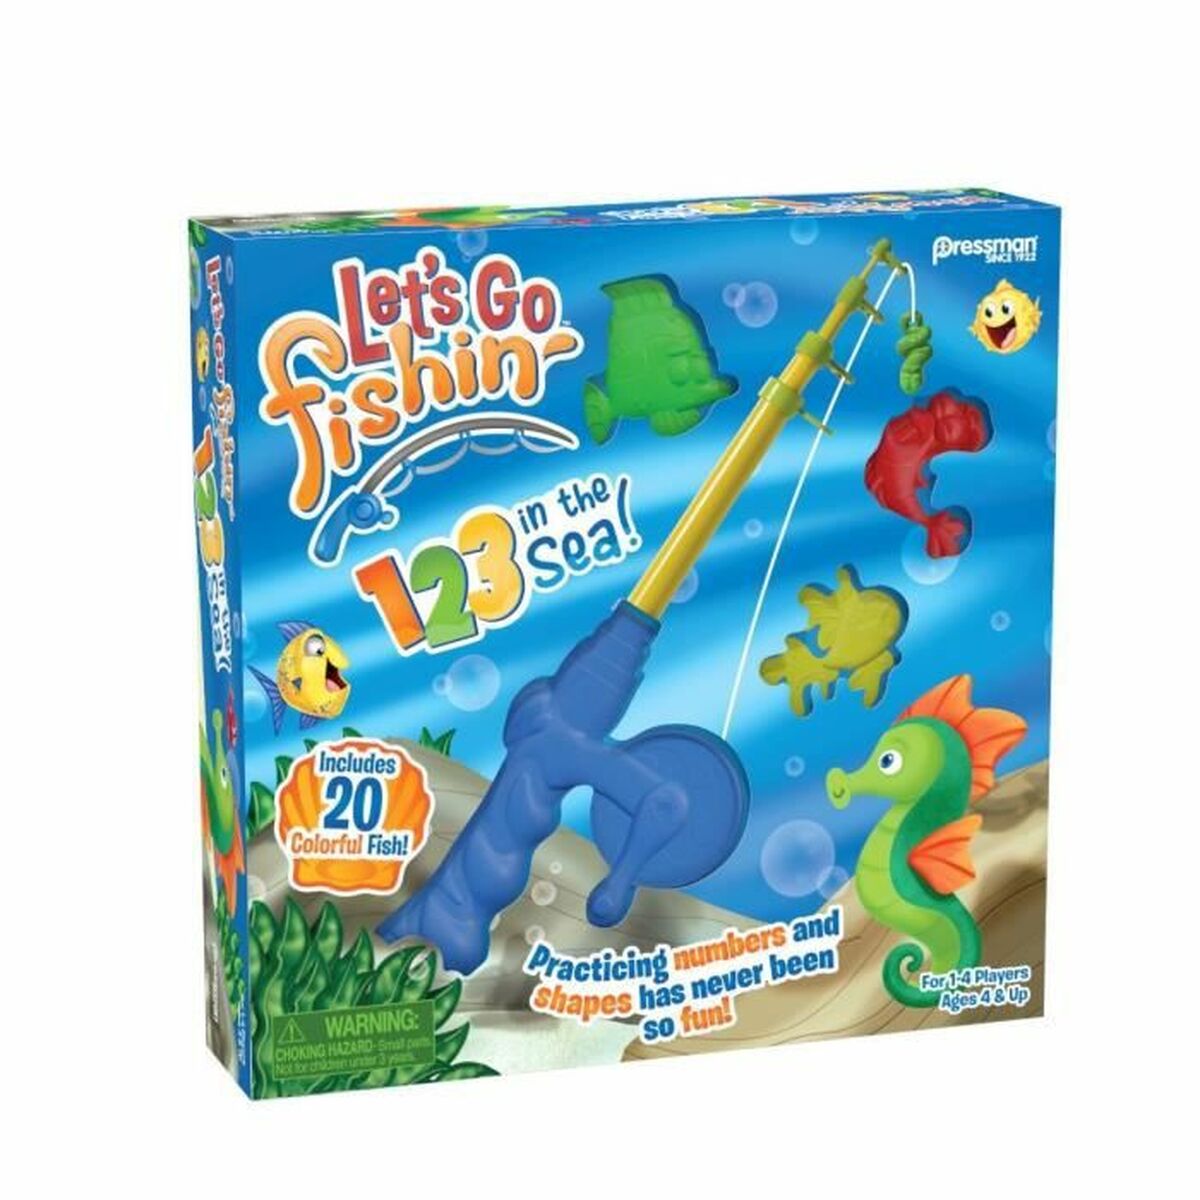 Board game Goliath Let's Go Fishin - 123 in the Sea! (FR) - Little Baby Shop